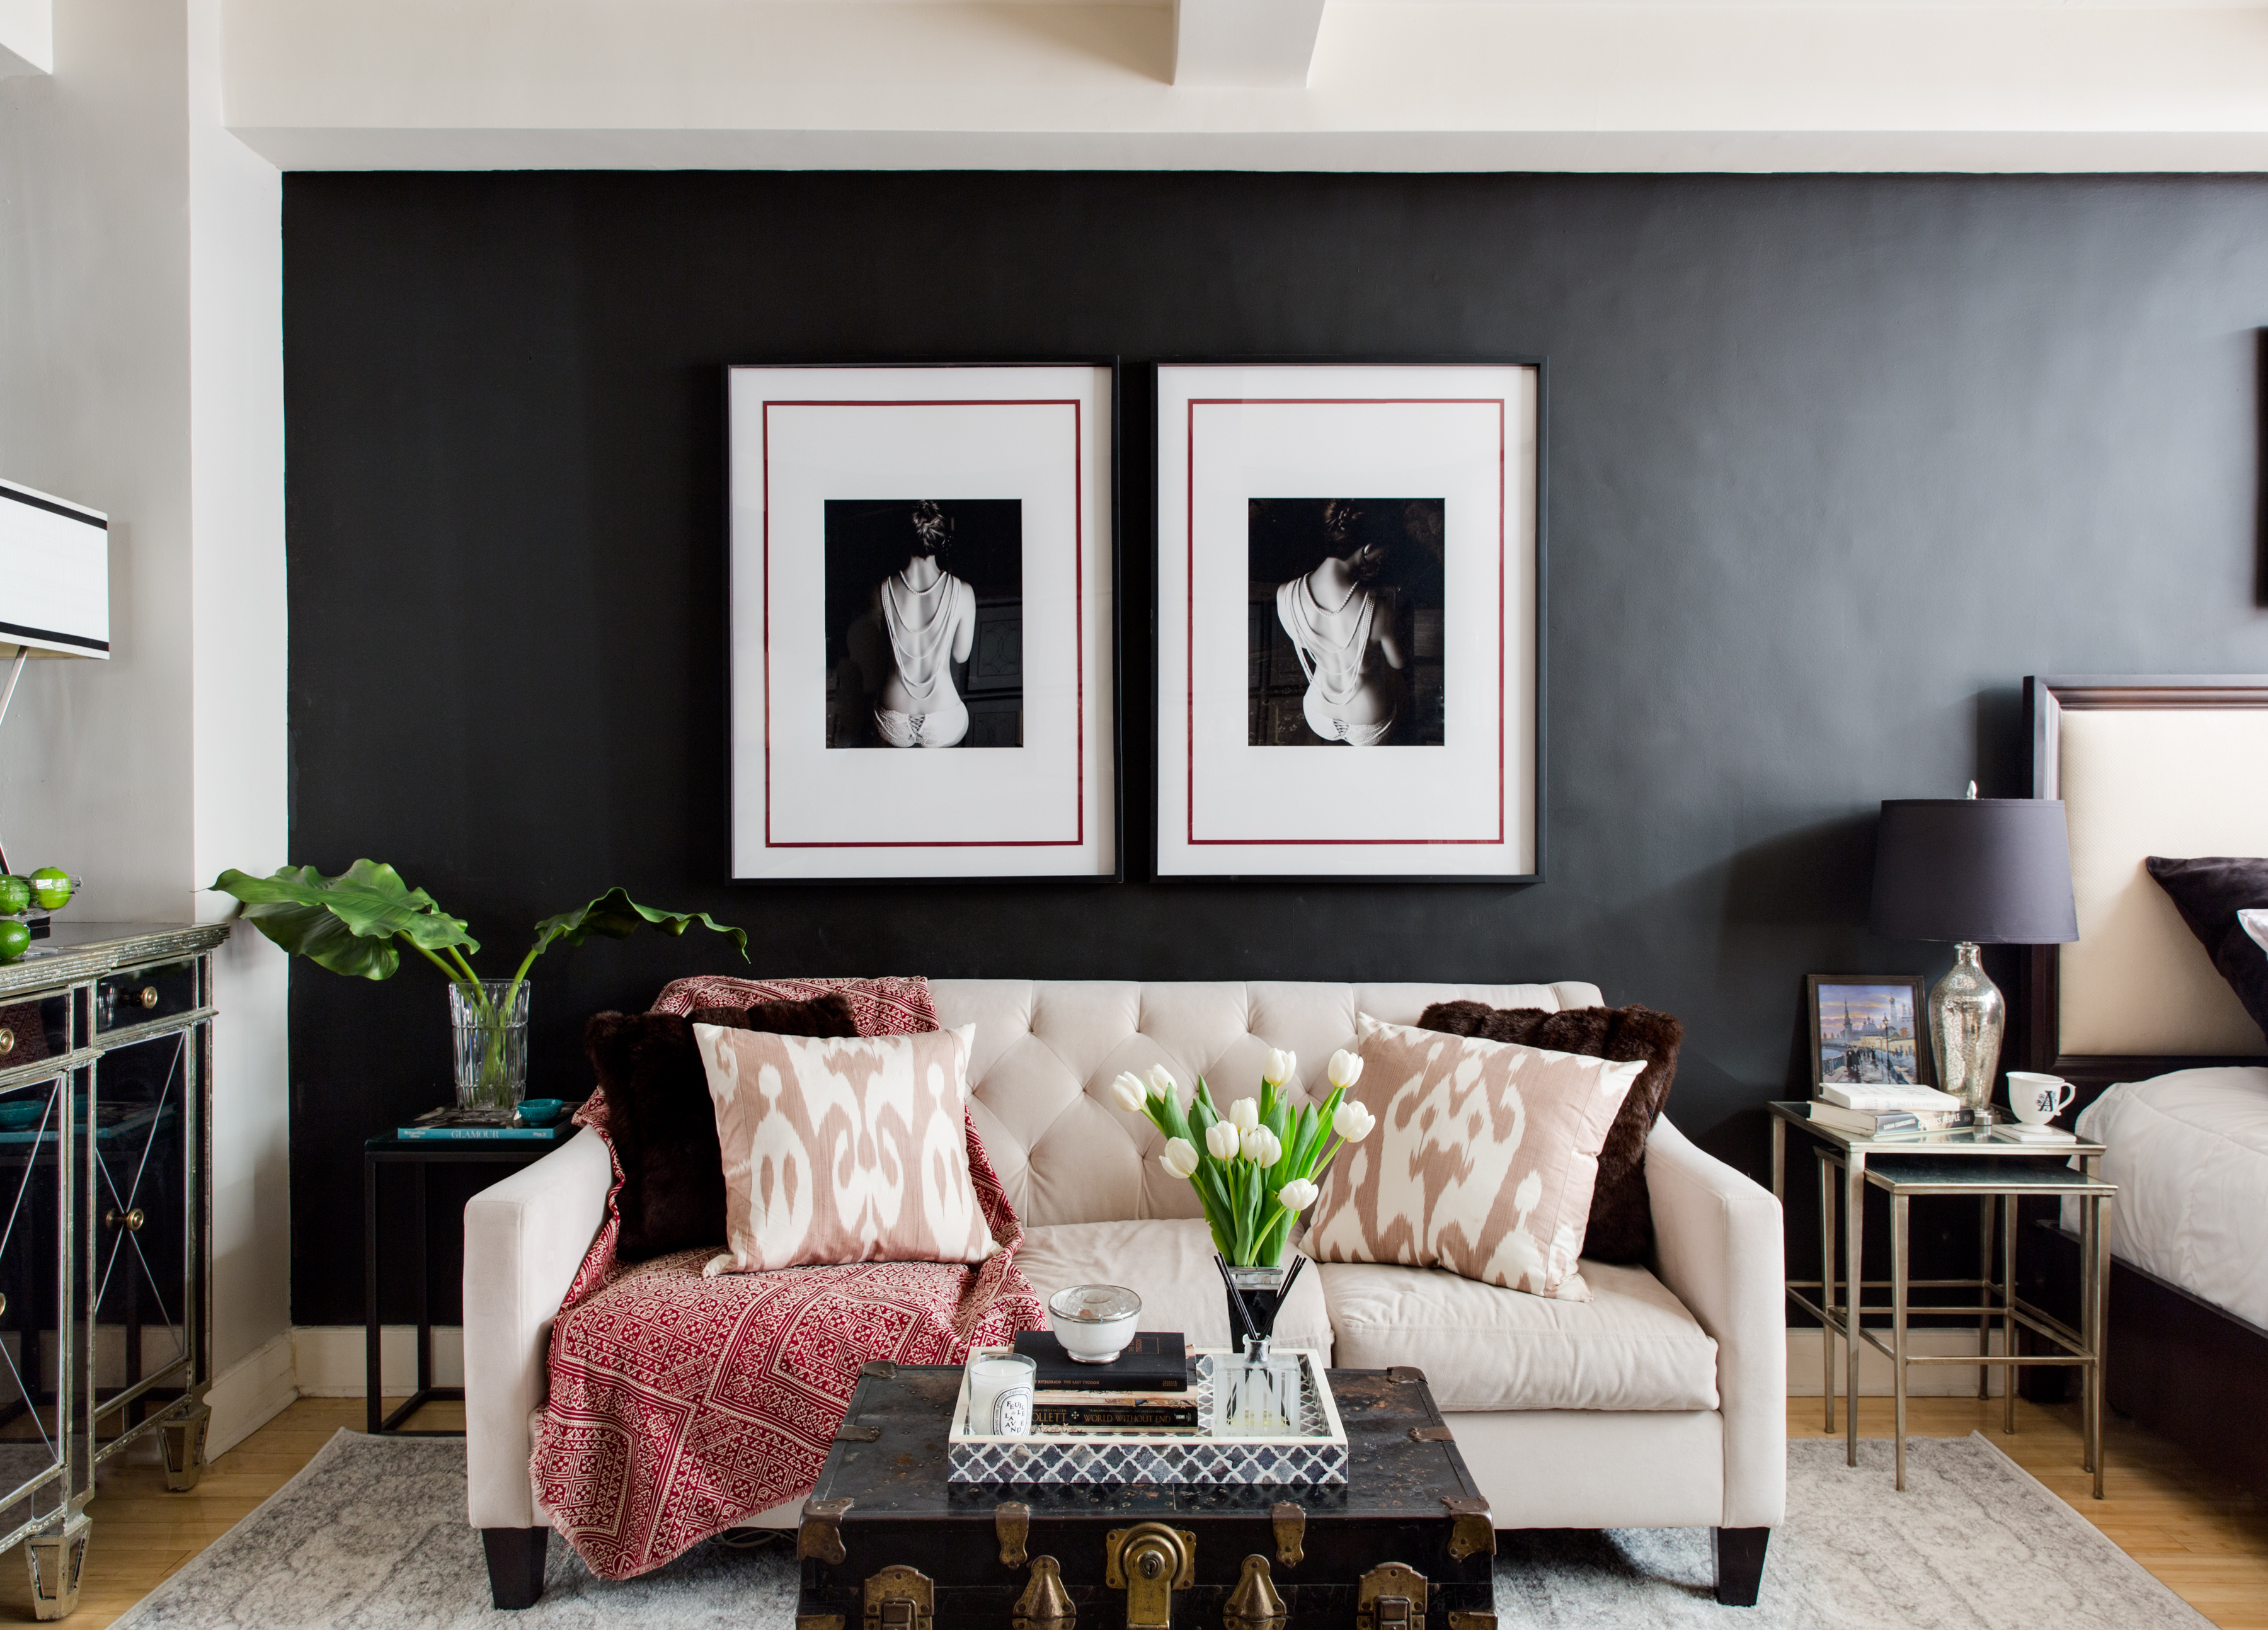 Design Tips For Painting Dark Walls In Small Rooms